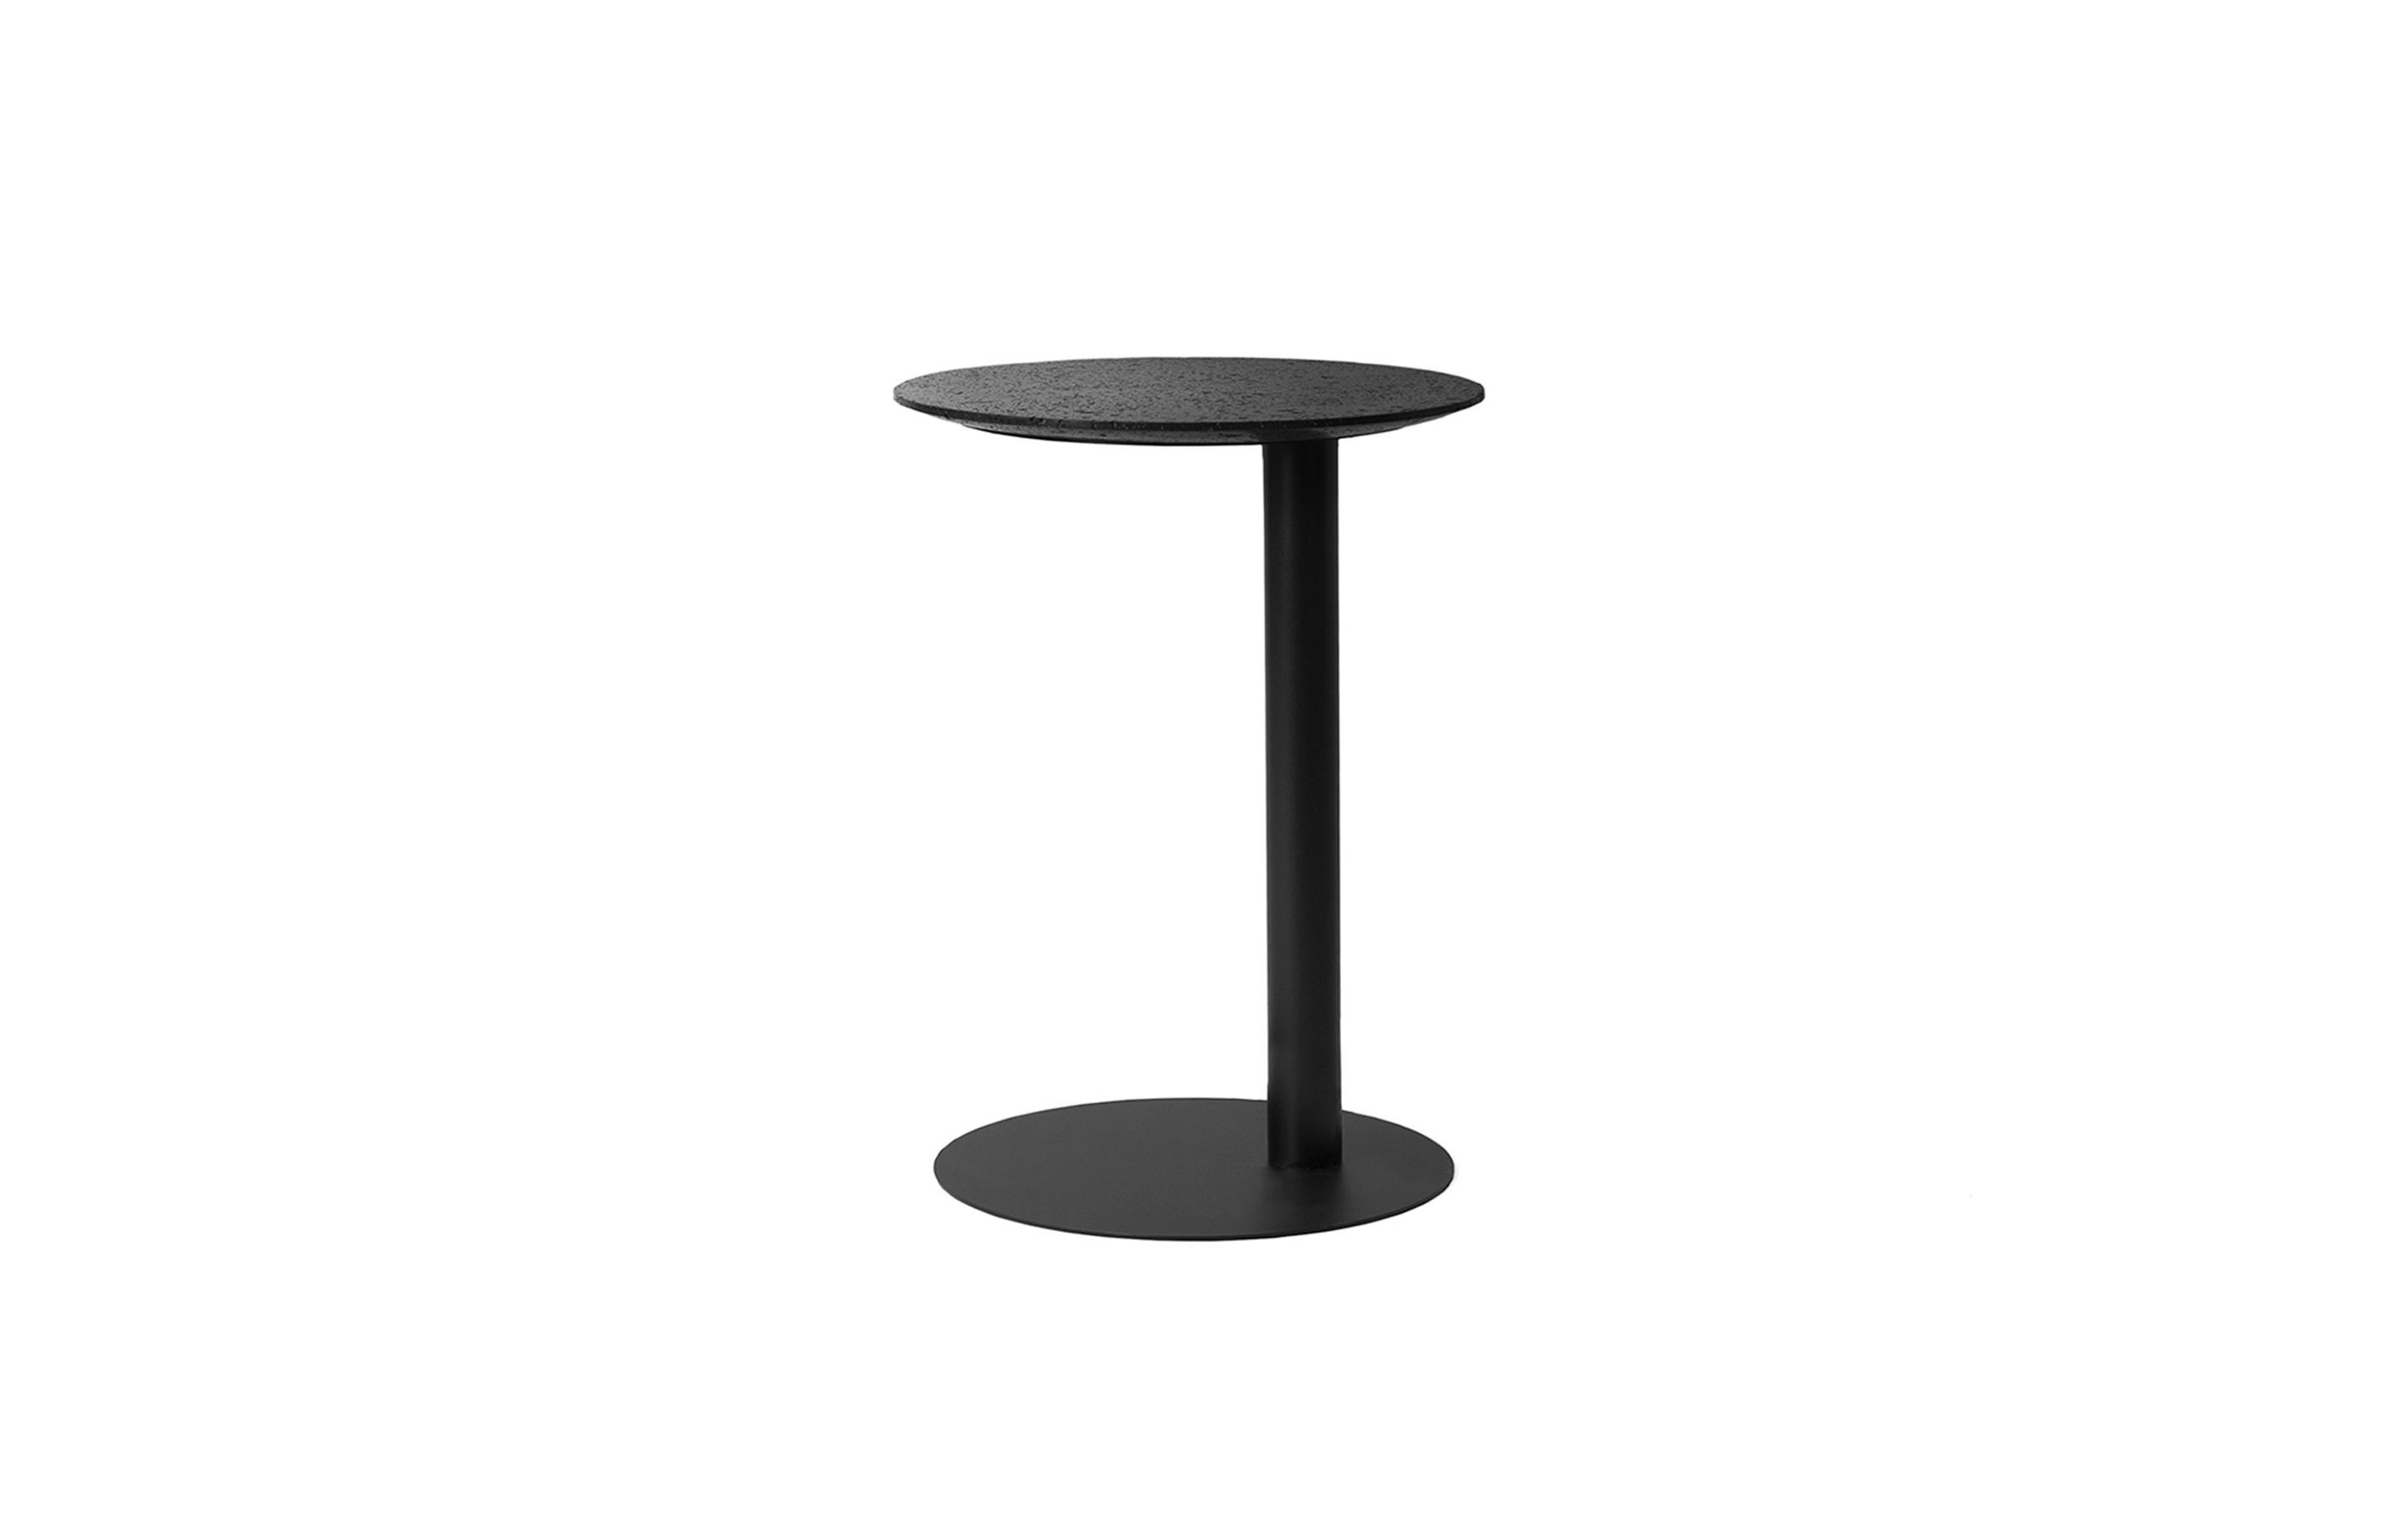 Buzao 'Right' side table by Remodern